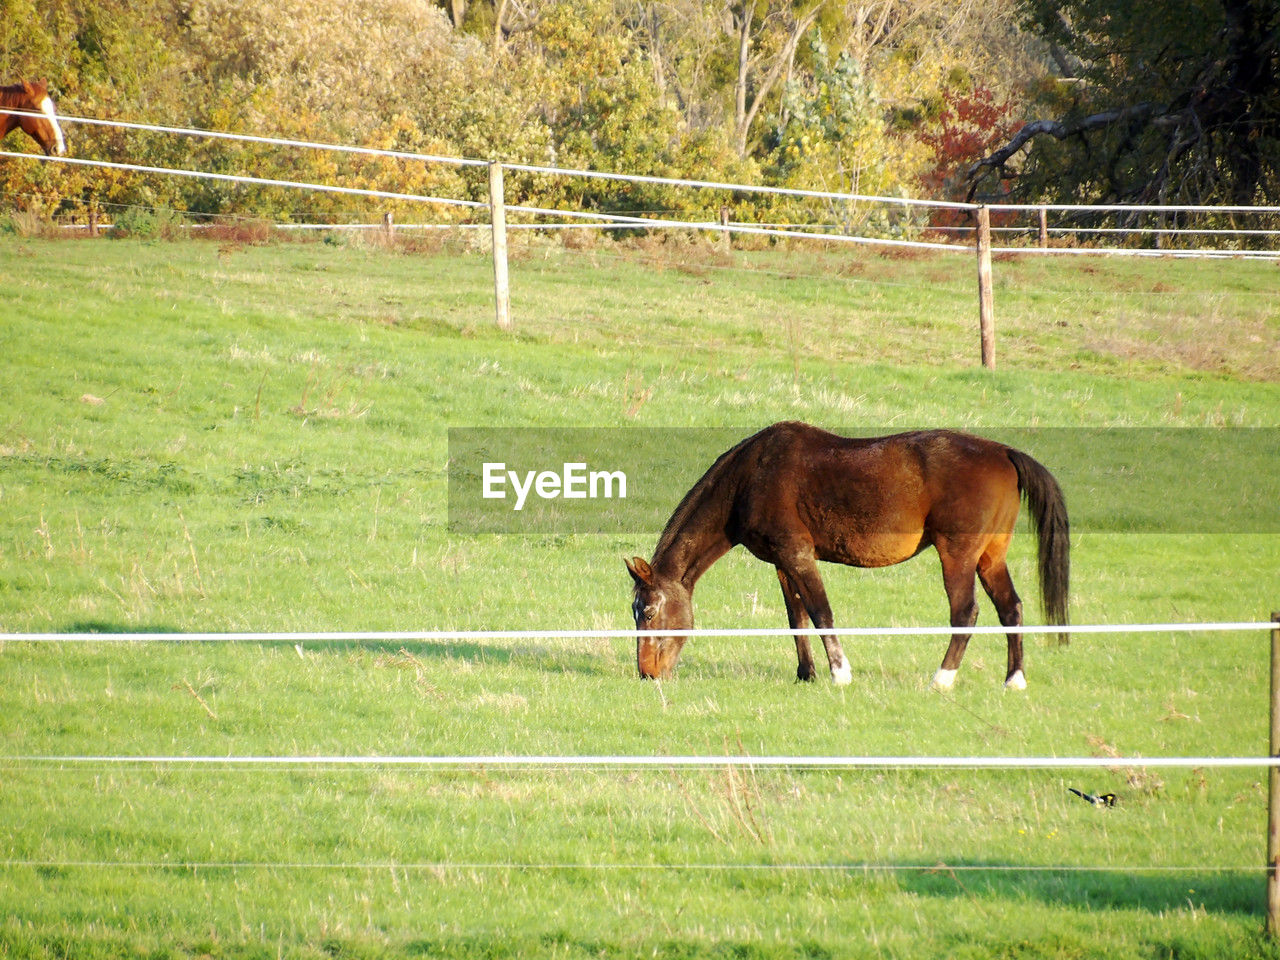 horse, mammal, animal themes, animal, pasture, domestic animals, livestock, grass, plant, field, fence, pet, mare, animal wildlife, land, green, agriculture, nature, grazing, one animal, no people, herbivorous, day, meadow, landscape, brown, paddock, stallion, tree, farm, standing, outdoors, grassland, environment, plain, ranch, growth, rural scene, prairie